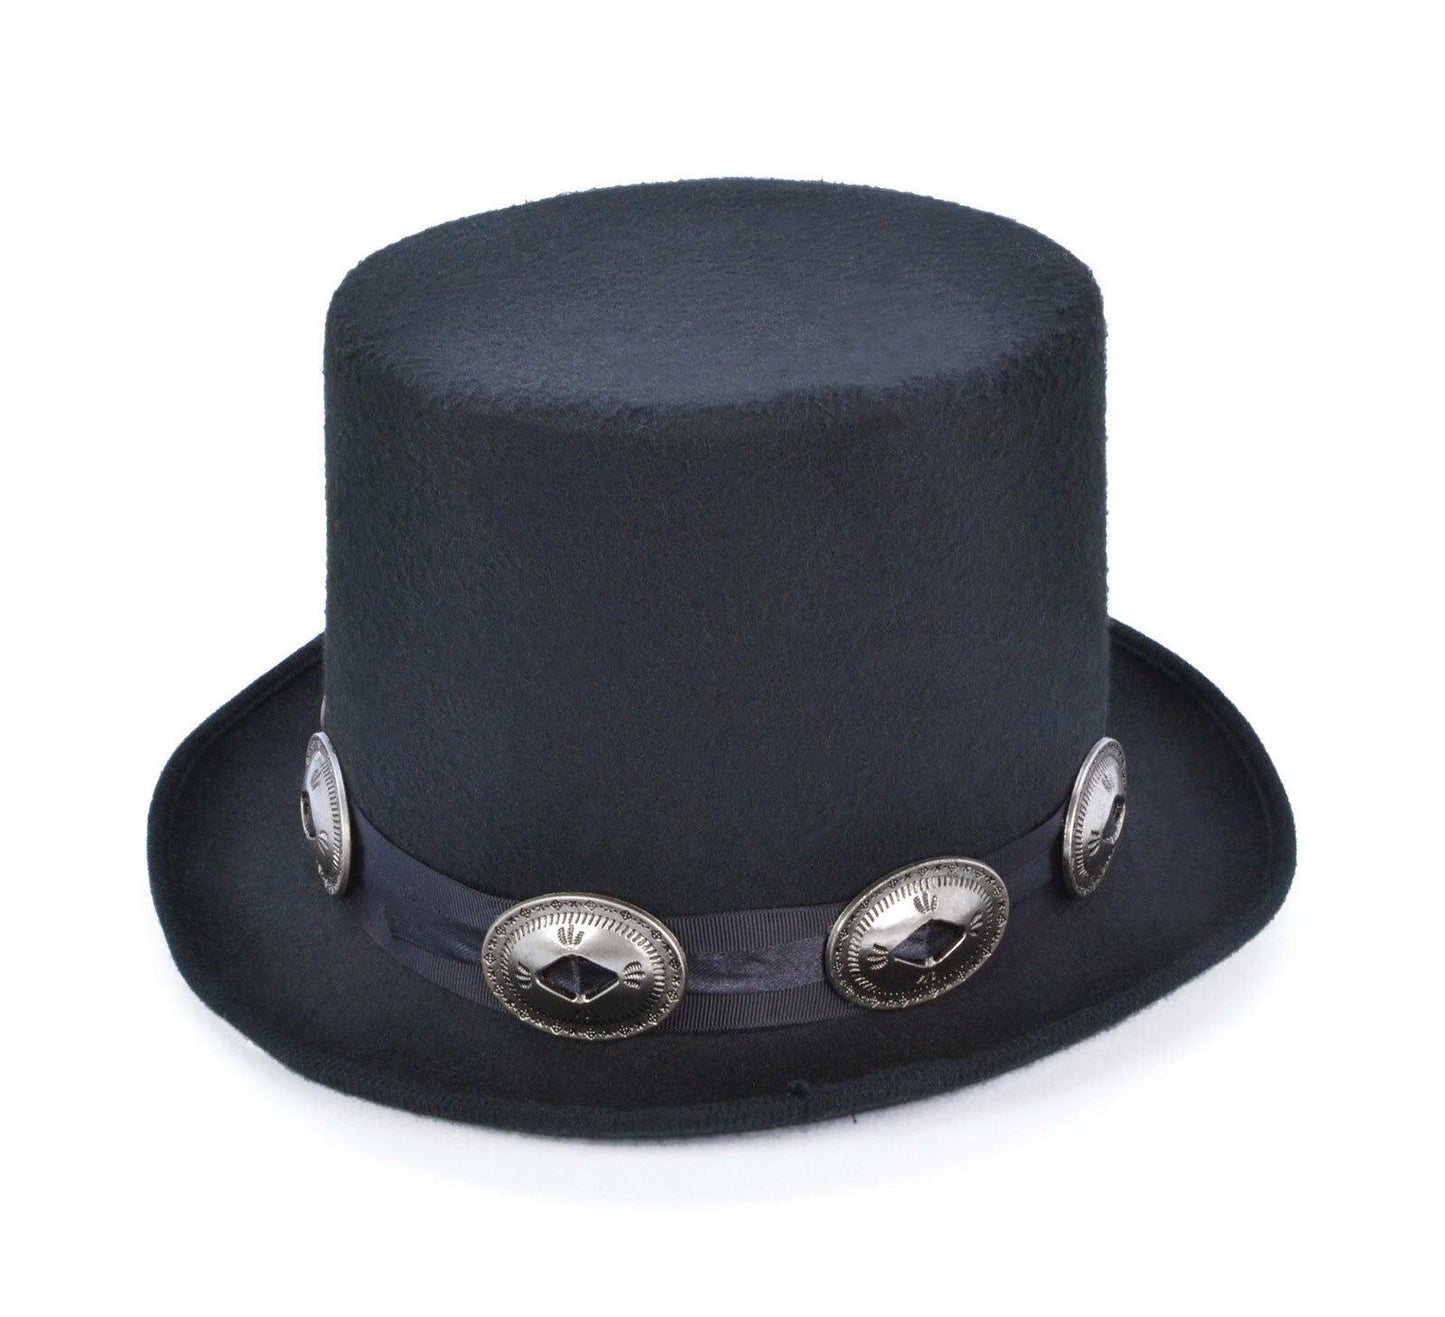 Slash Style Adult Black Rocker Top Hat with Decorated BanFancy Outfit Accessory - Labreeze